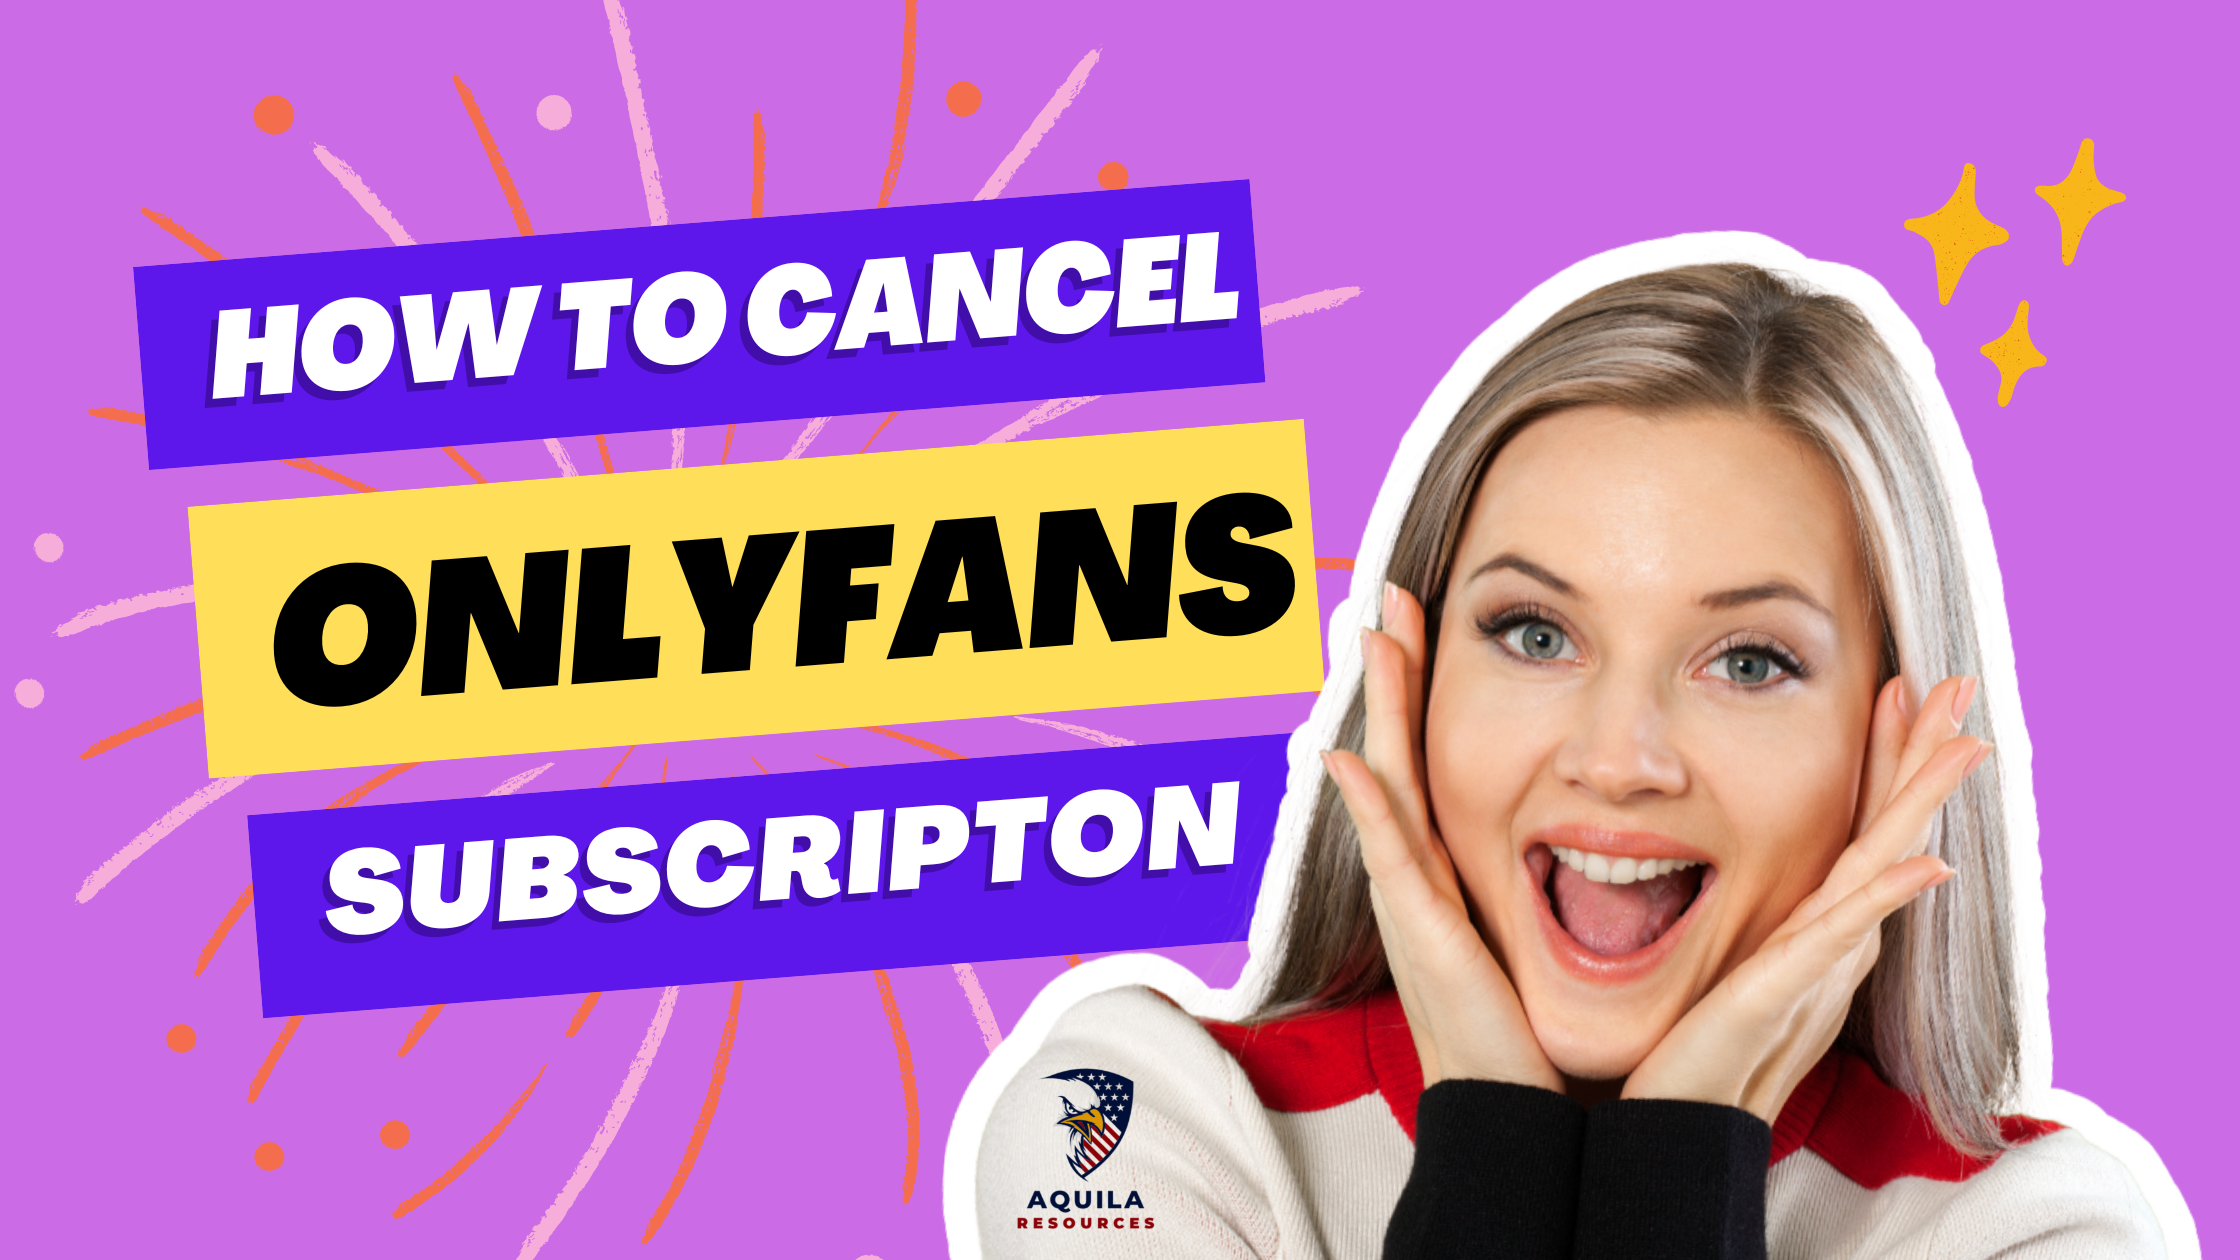 HOW TO CANCEL ONLYFANS SUBSCRIPTION